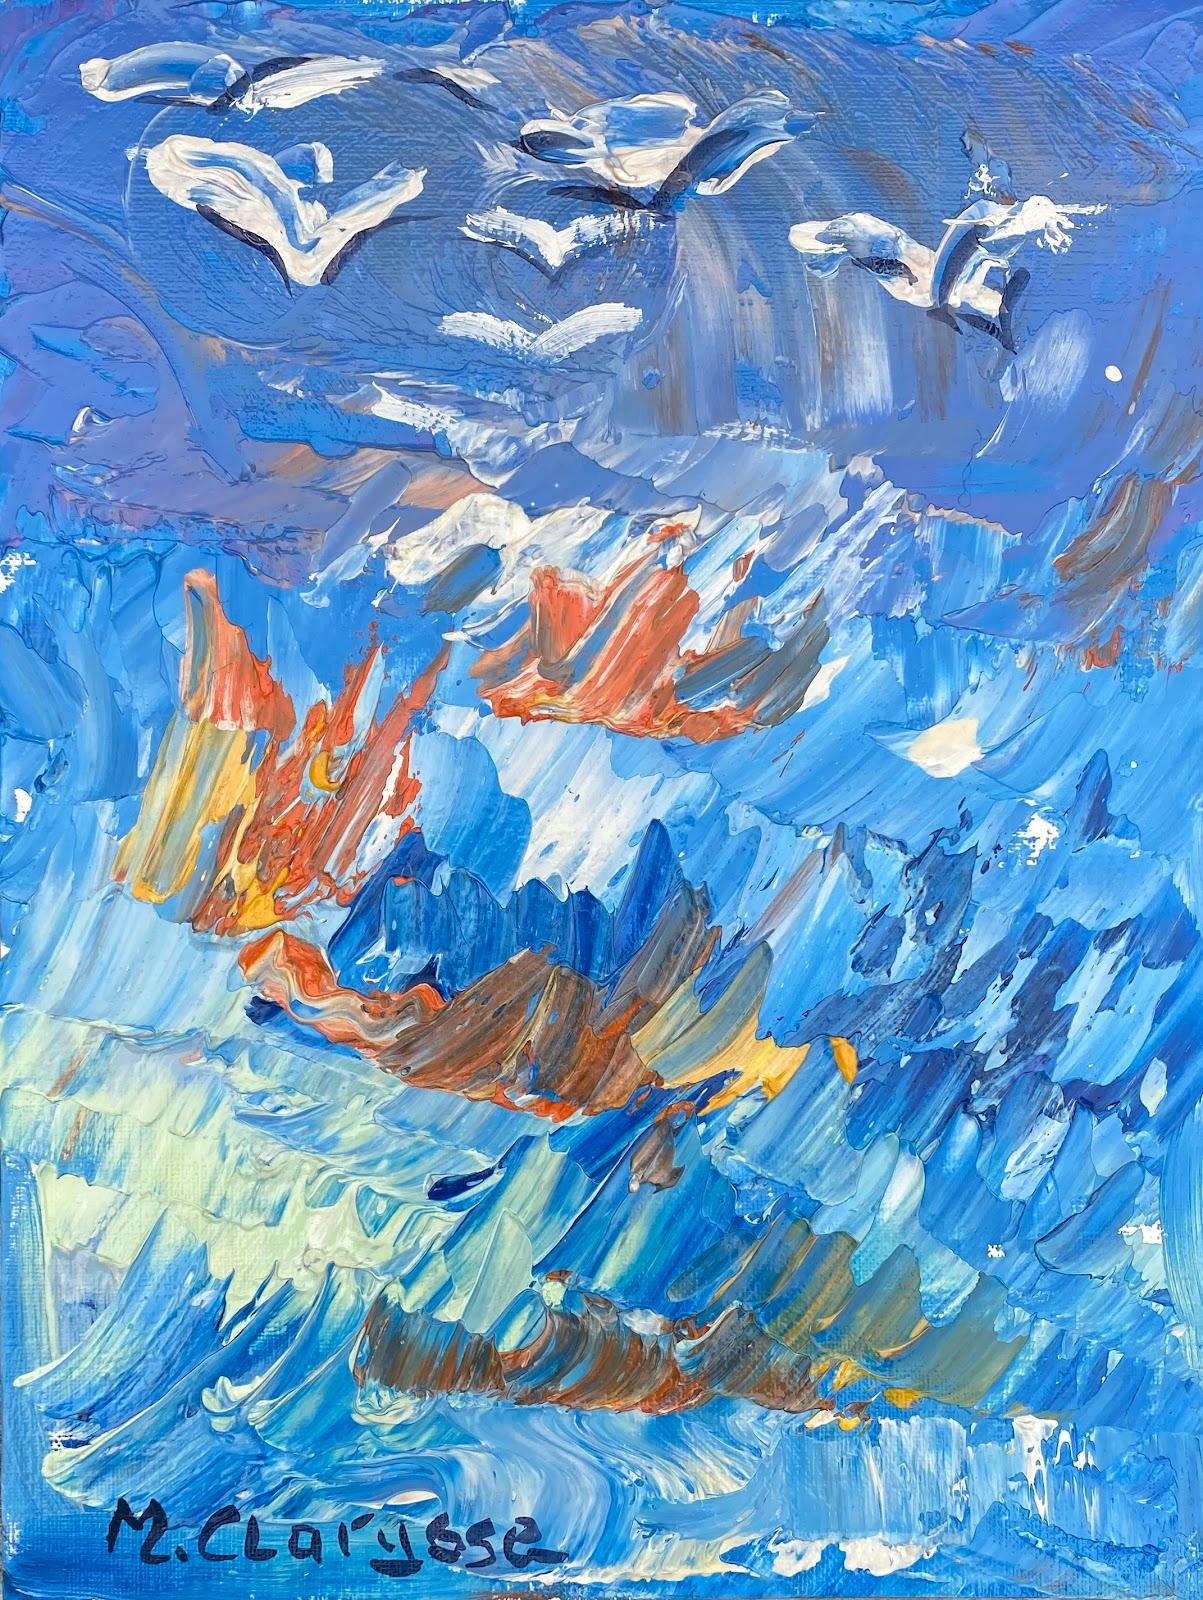 Maggy Clarysse Abstract Painting - Bright & Colorful French Impressionist Oil Painting Seagulls Seascape